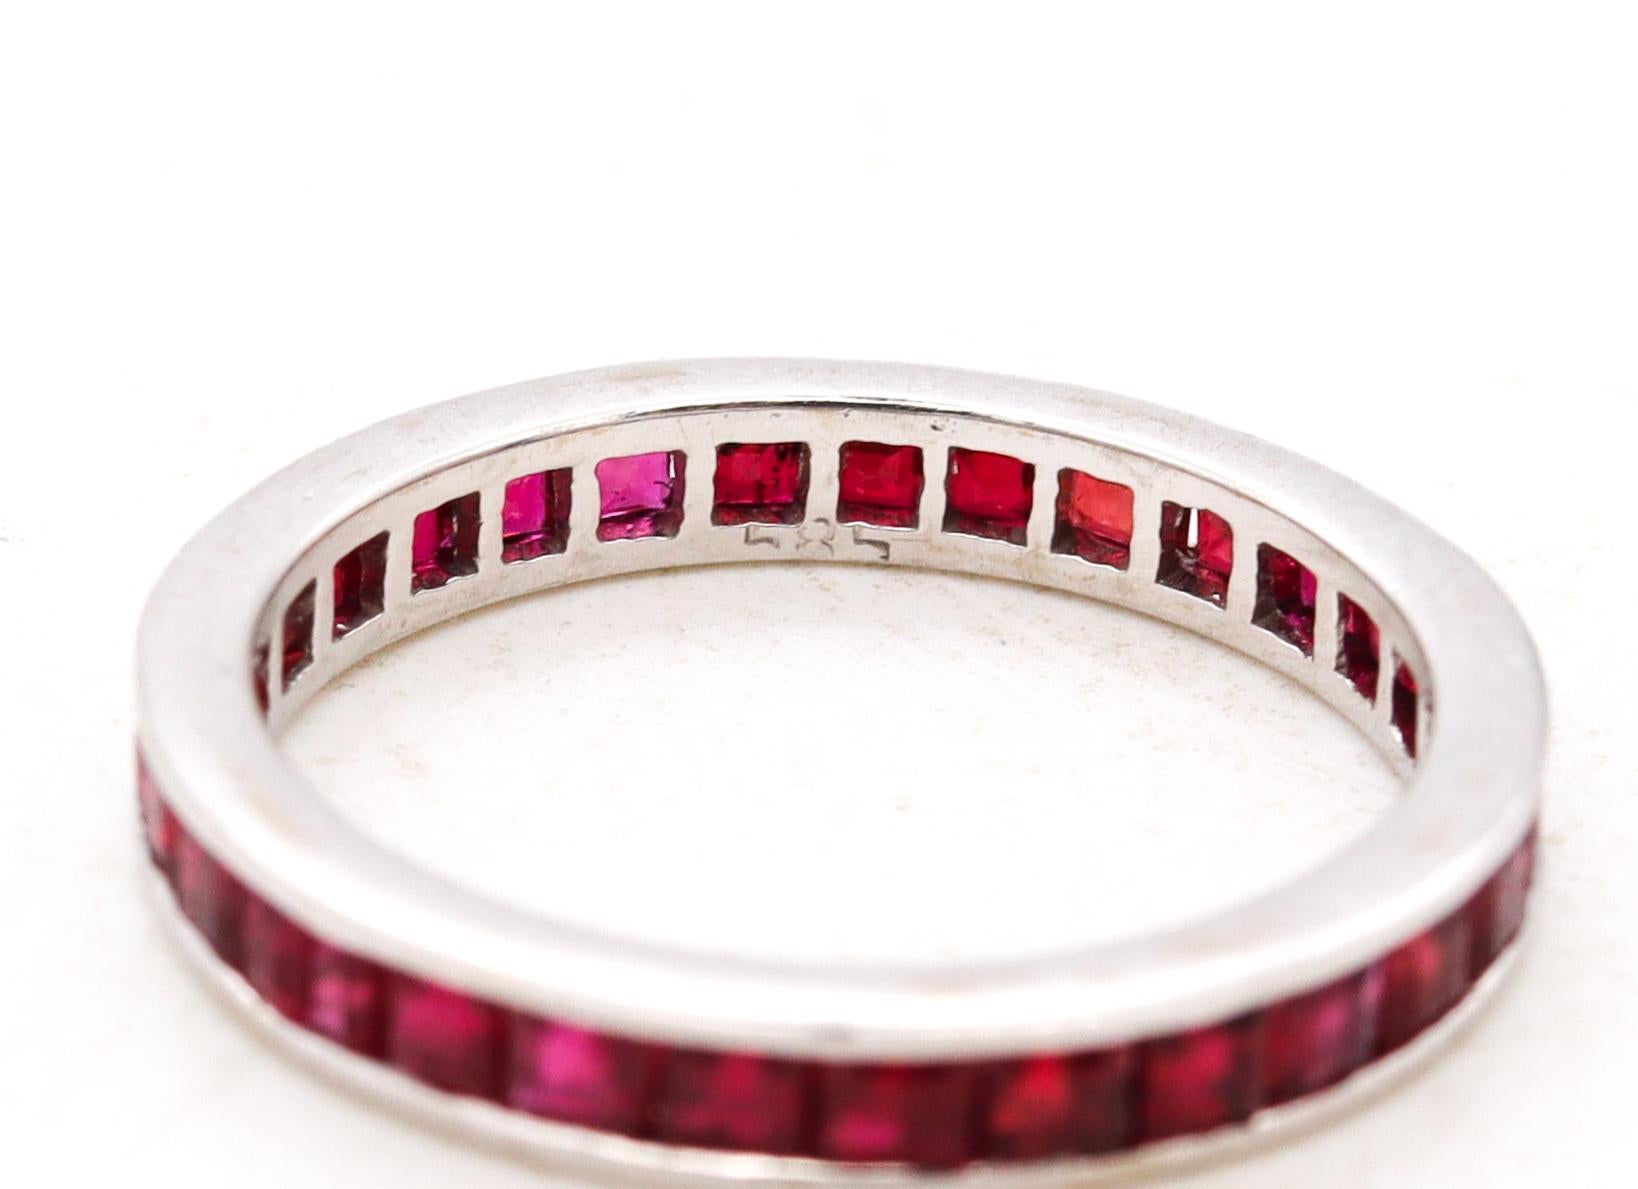 Women's Eternity Ring Band in 18Kt White Gold with 1.82 Carats in Burmese Red Rubies For Sale